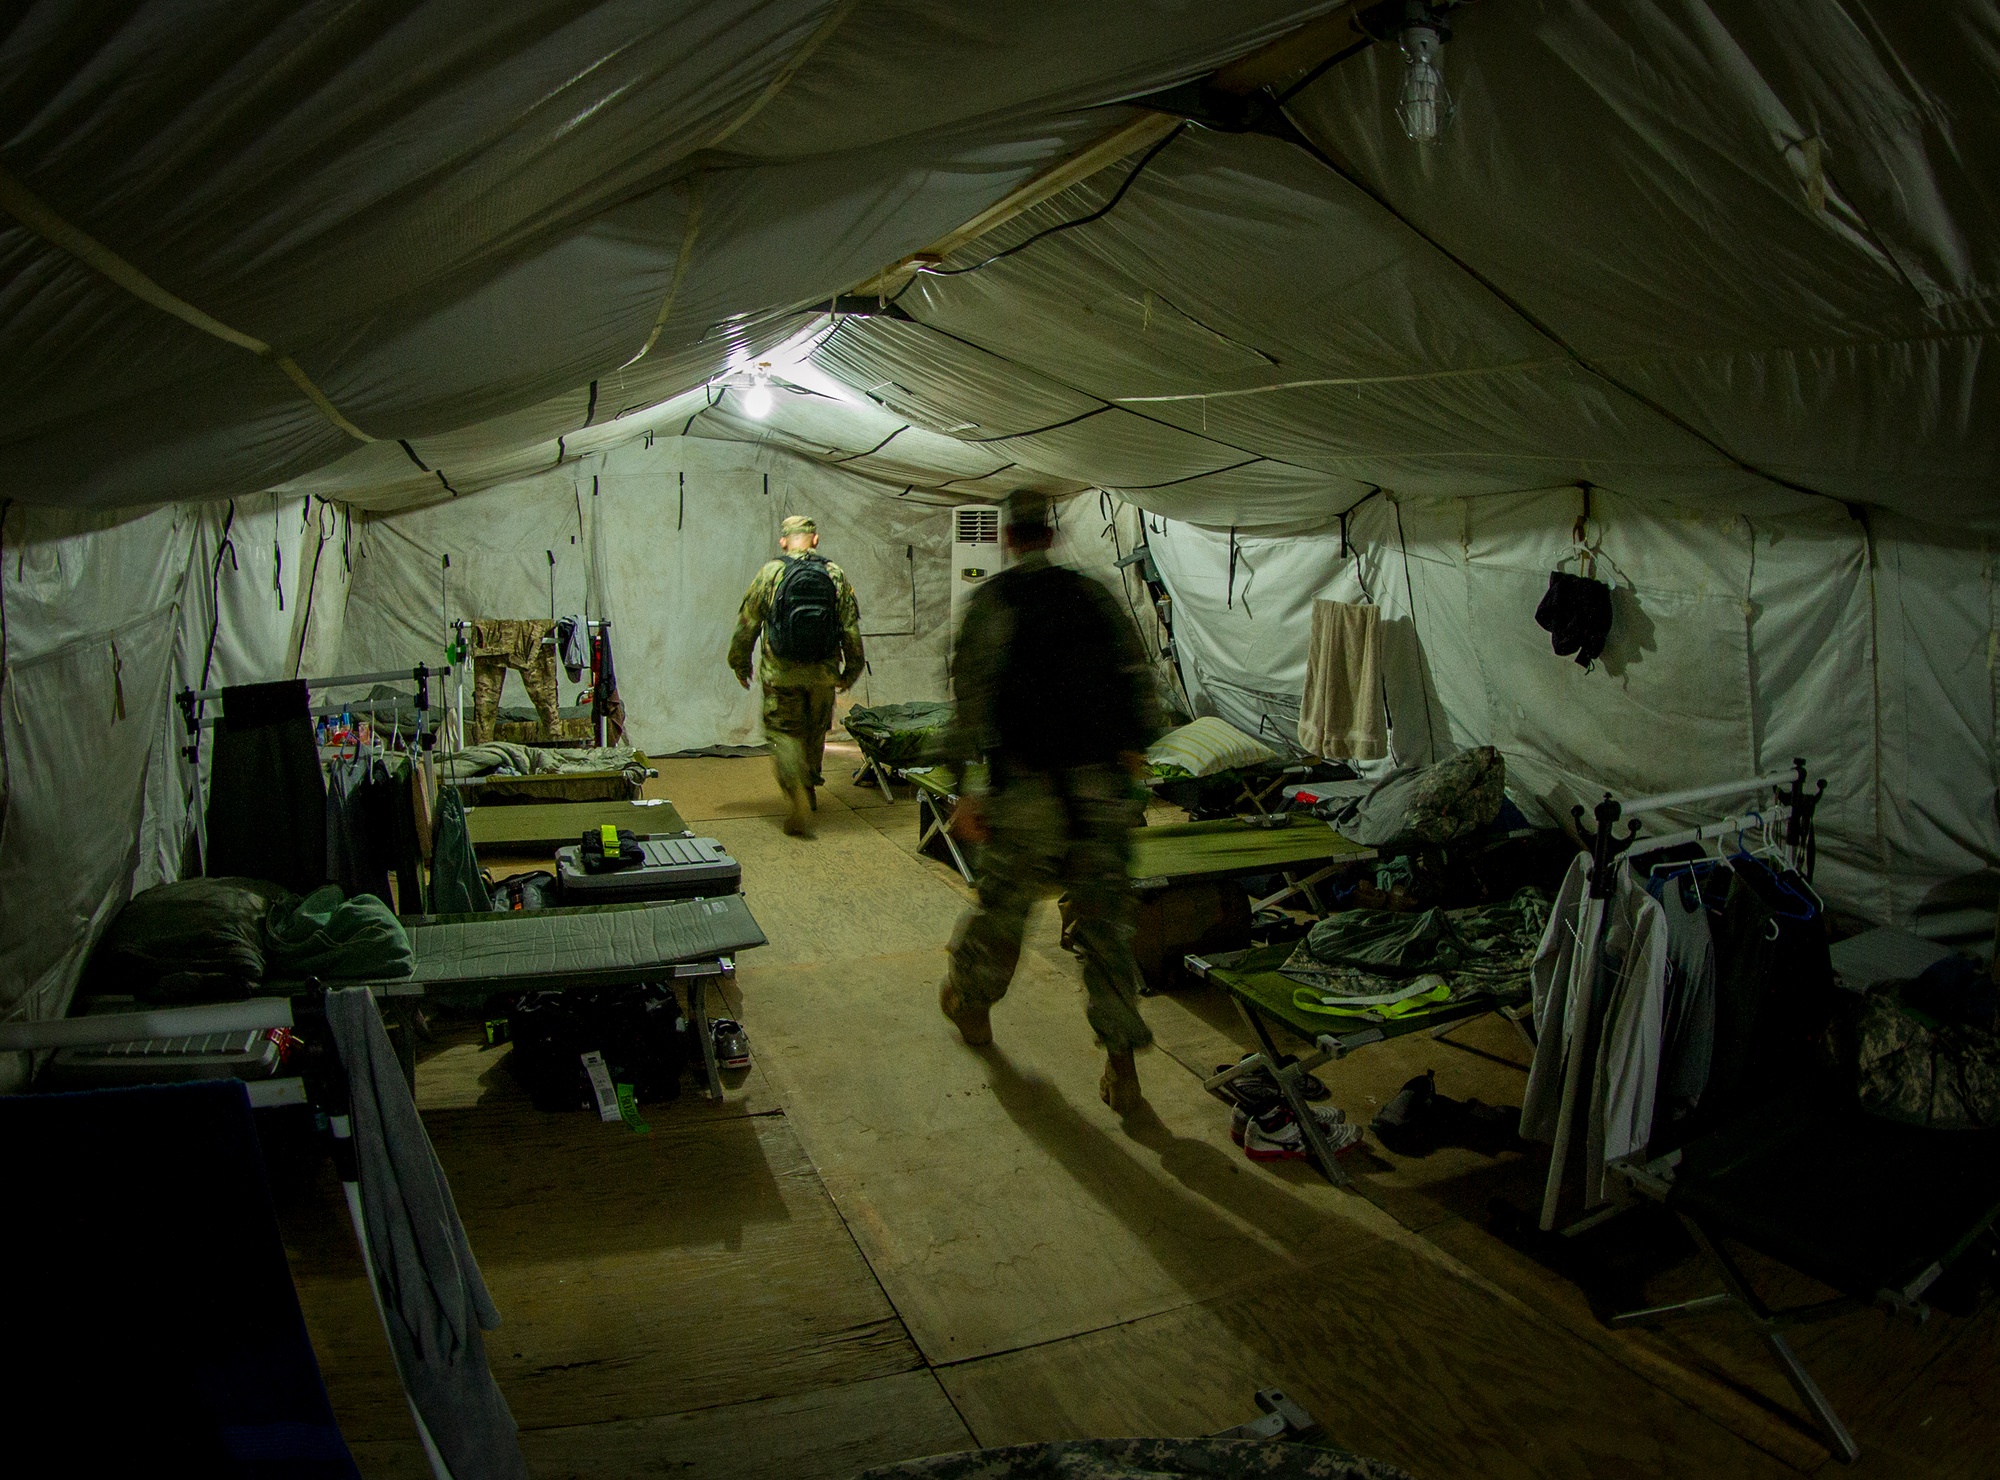 DVIDS - Images - Out of the tent, off to work [Image 24 of 25]